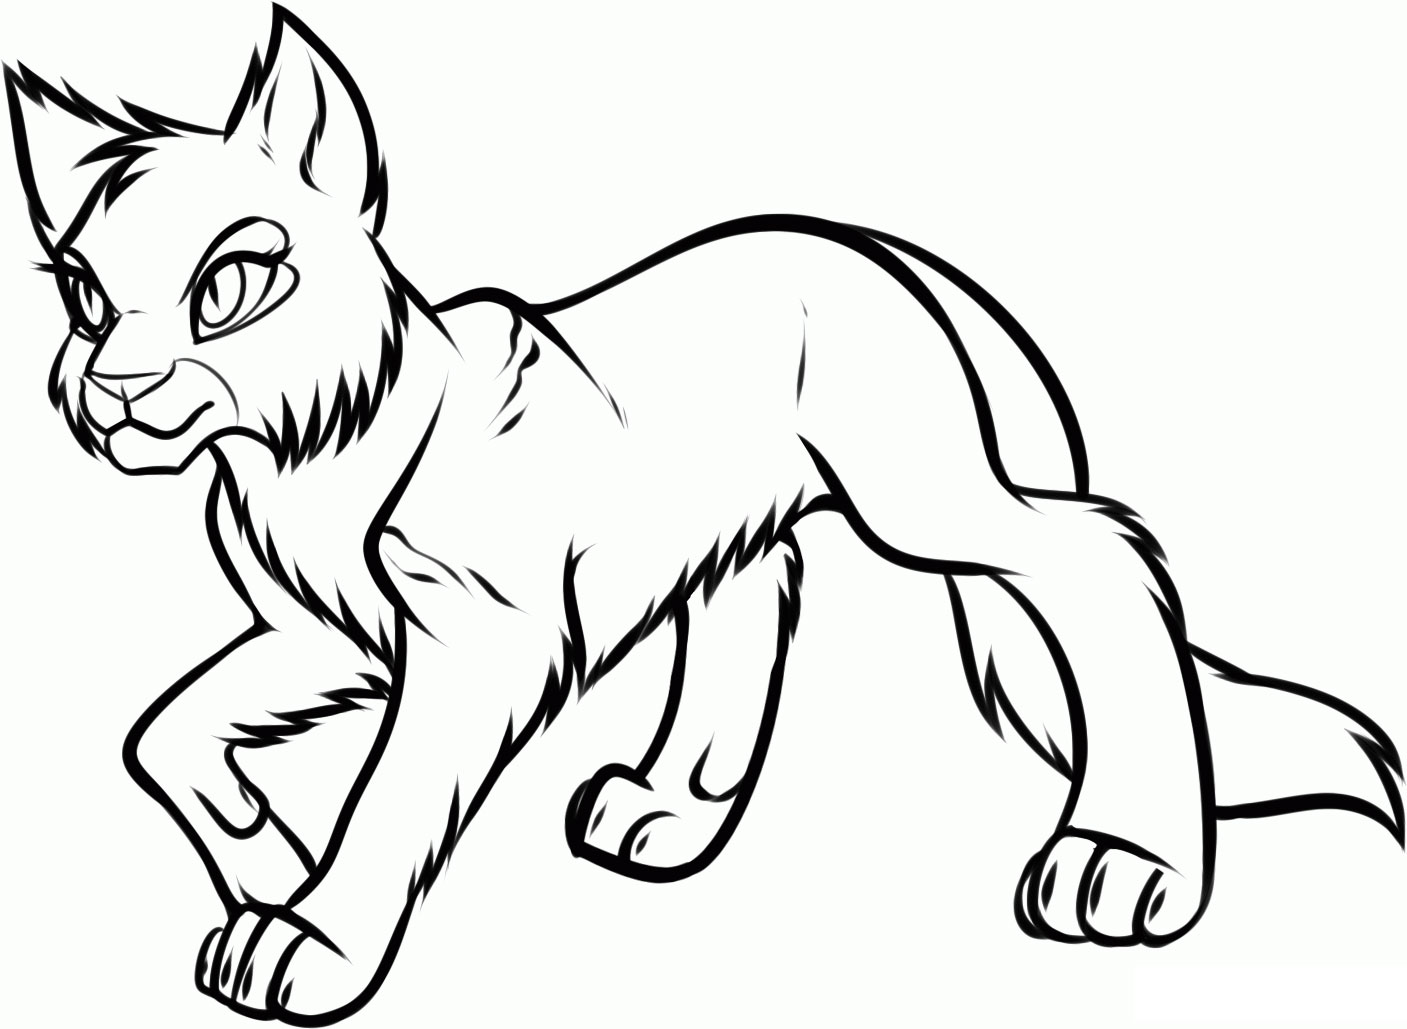 Cat Coloring Pages for Adults - Bestofcoloring.com